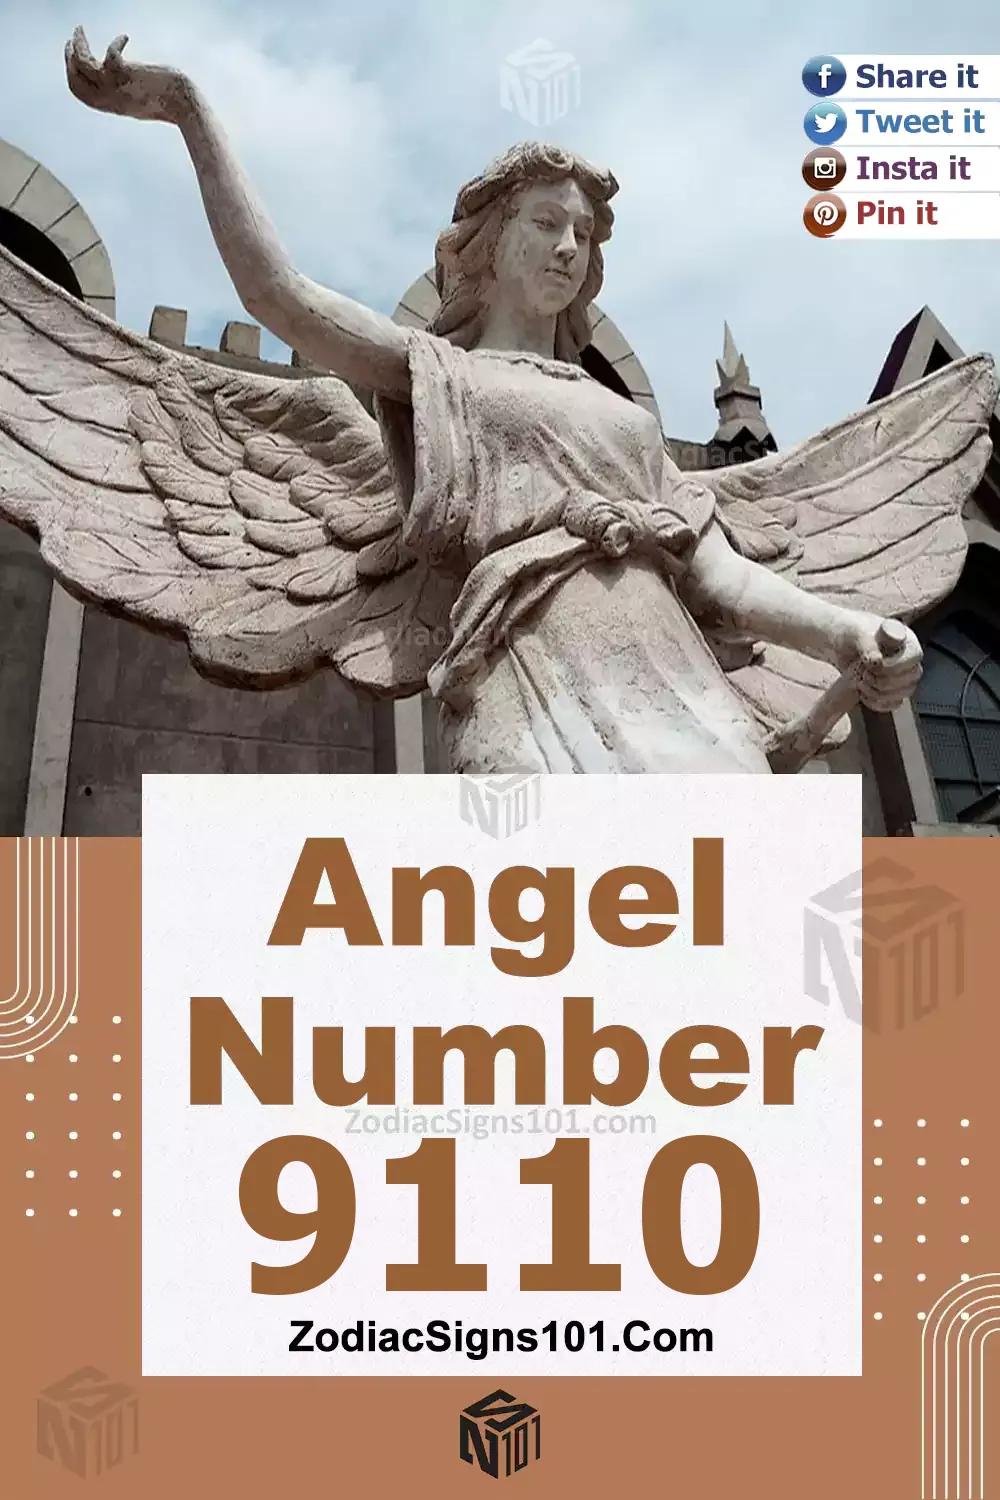 9110 Angel Number Meaning